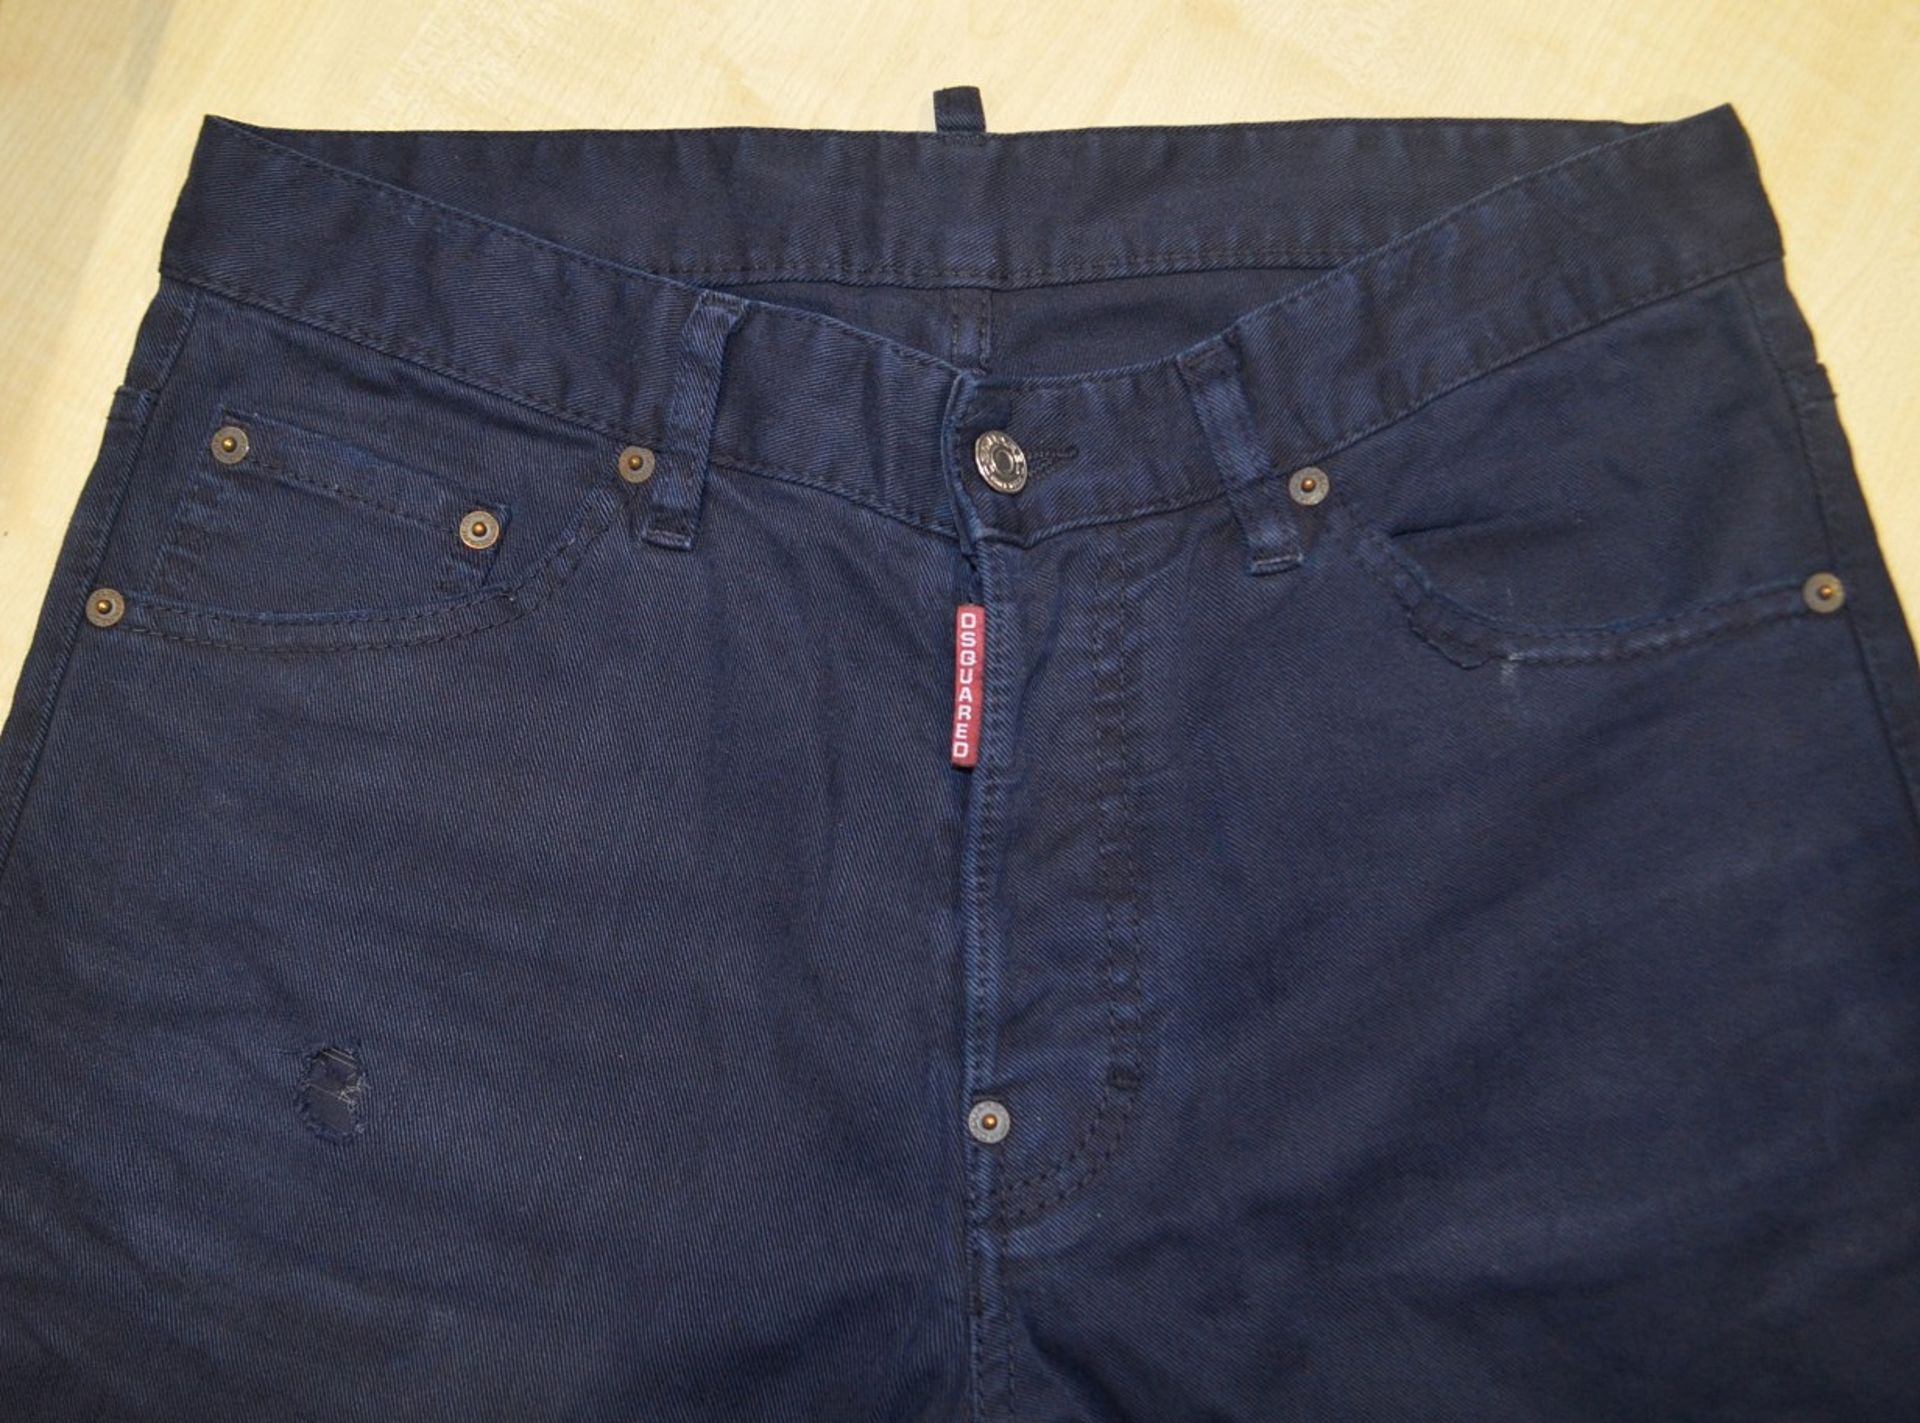 1 x Pair Of Men's Genuine Dsquared2 Designer Jeans In Navy - Waist Size: UK 30 / ITALY 46 - Preowned - Image 3 of 7